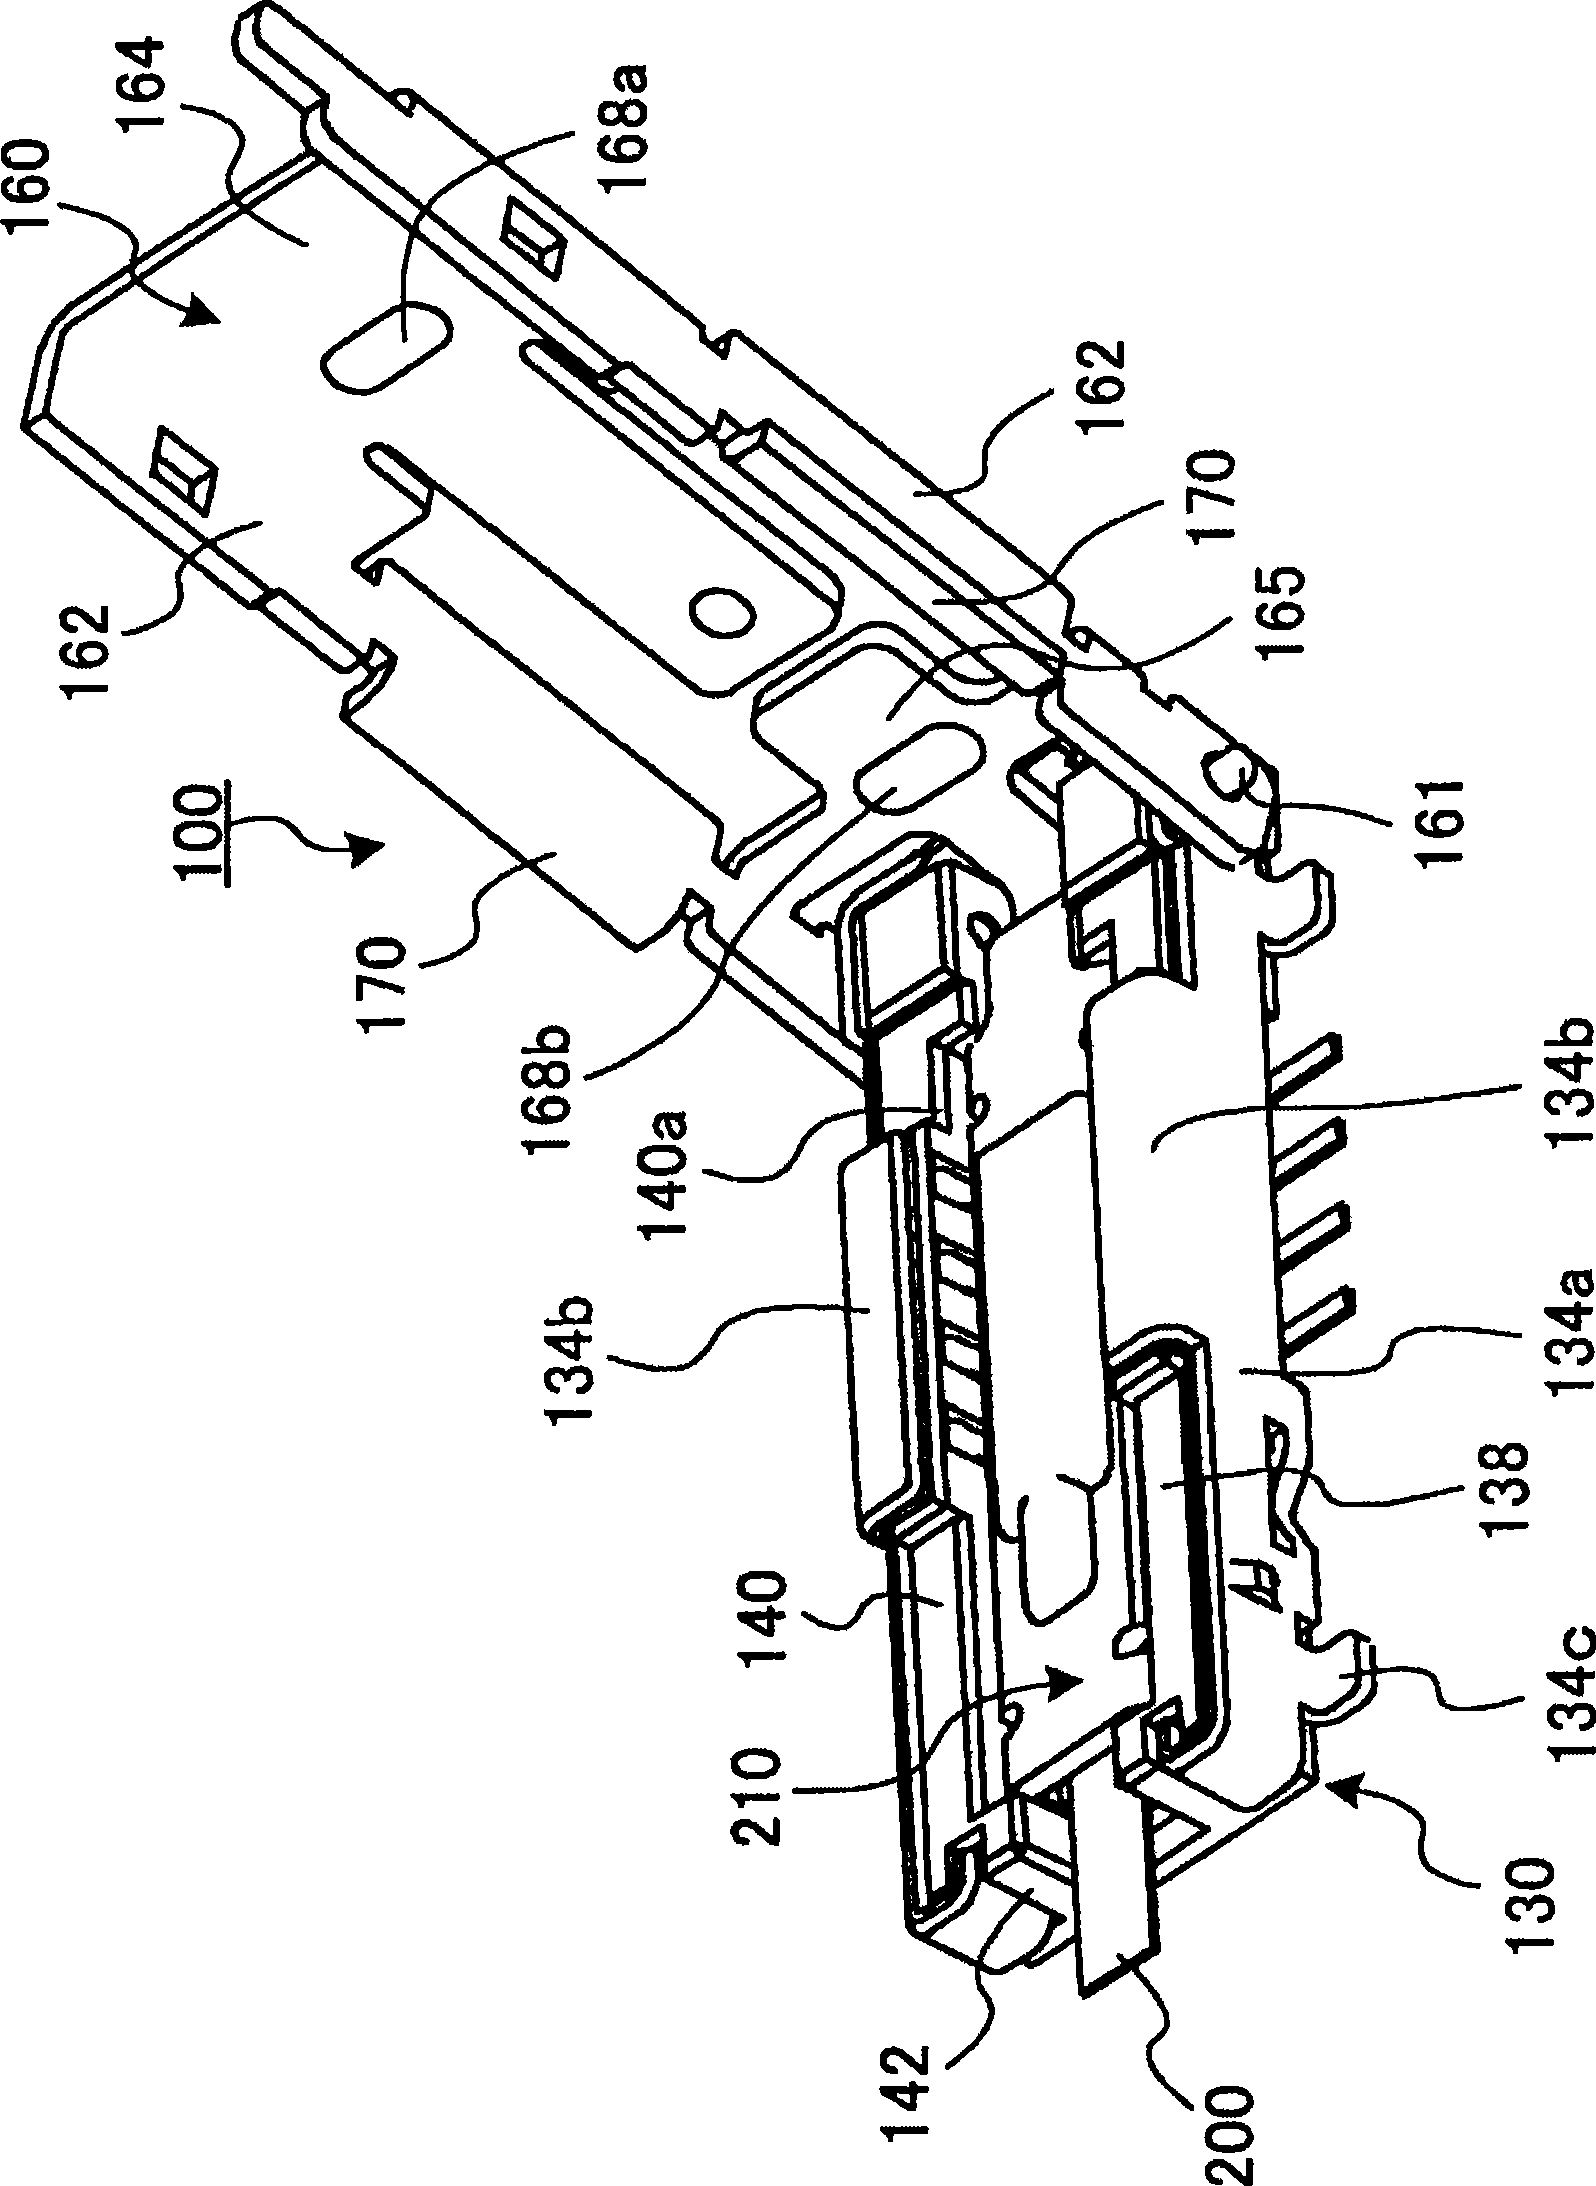 Connector for connecting electronic component